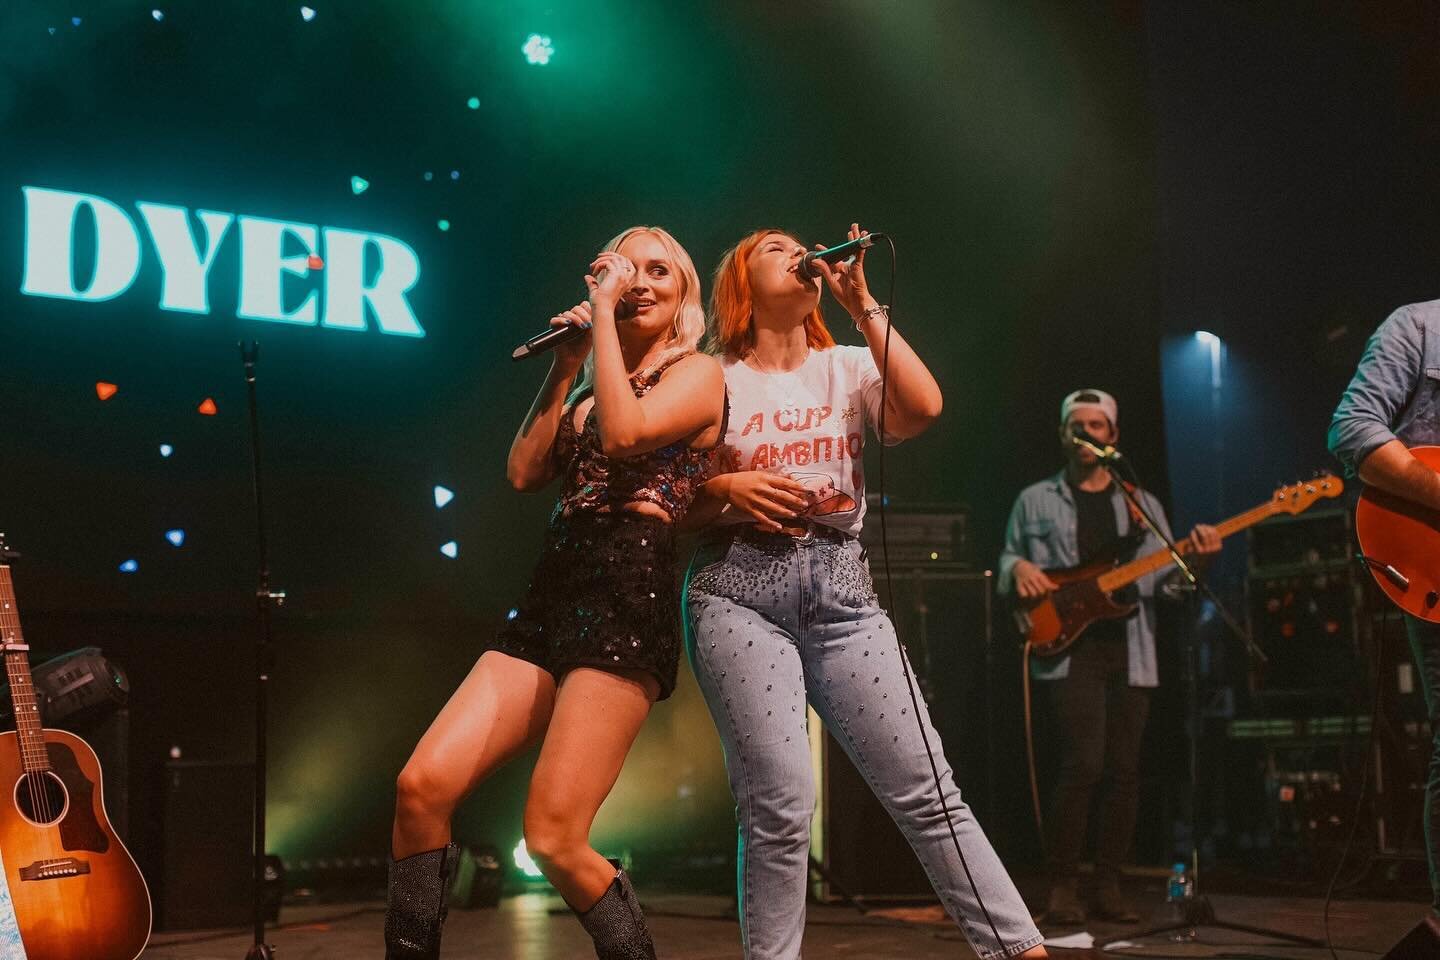 &ldquo;Sammy gets a little flirty when she&rsquo;s sipping on the bubbly&rdquo;. Thanks for writing me in a song gals. Love u and alllll the Dumb Decisions. @melanie_dyer @caitlynshadbolt 🩷🩷

@cmcrocksfest 
Pics: @jakedaveystudios